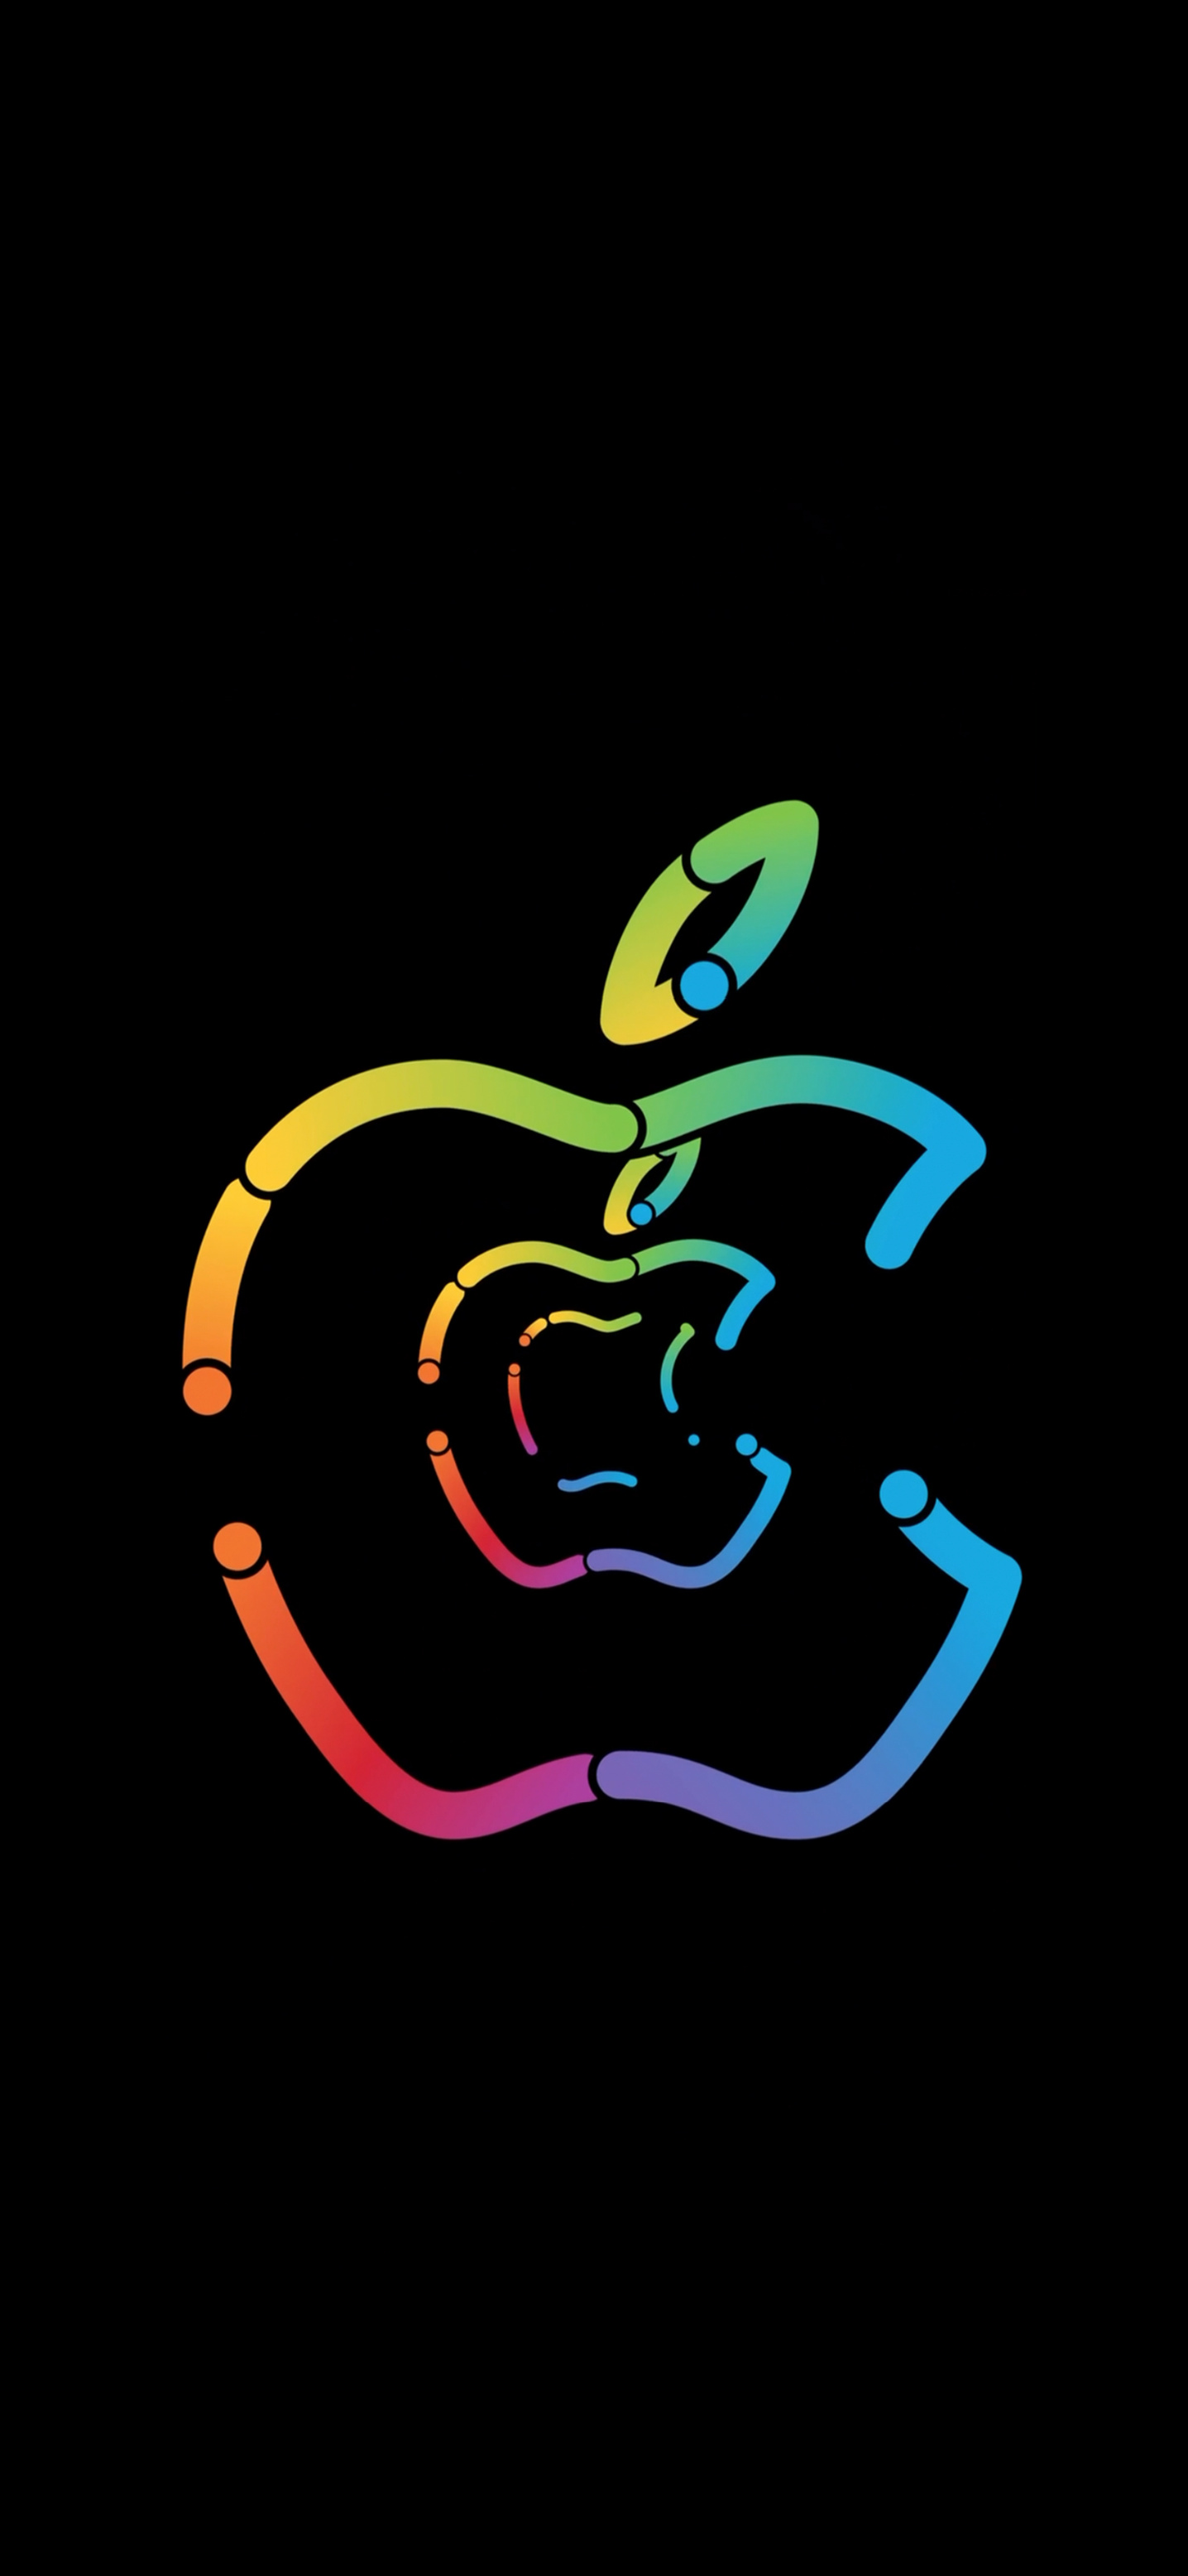 Apple logo animation, iPhone 11 promotional, Dynamic visuals, Interactive charm, 1440x3120 HD Handy